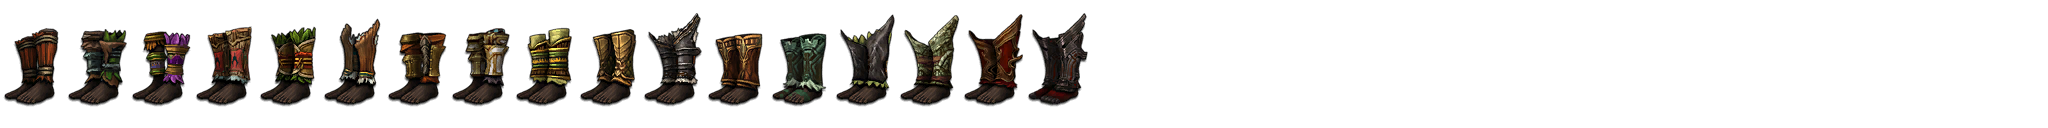 Witch Doctor Boots